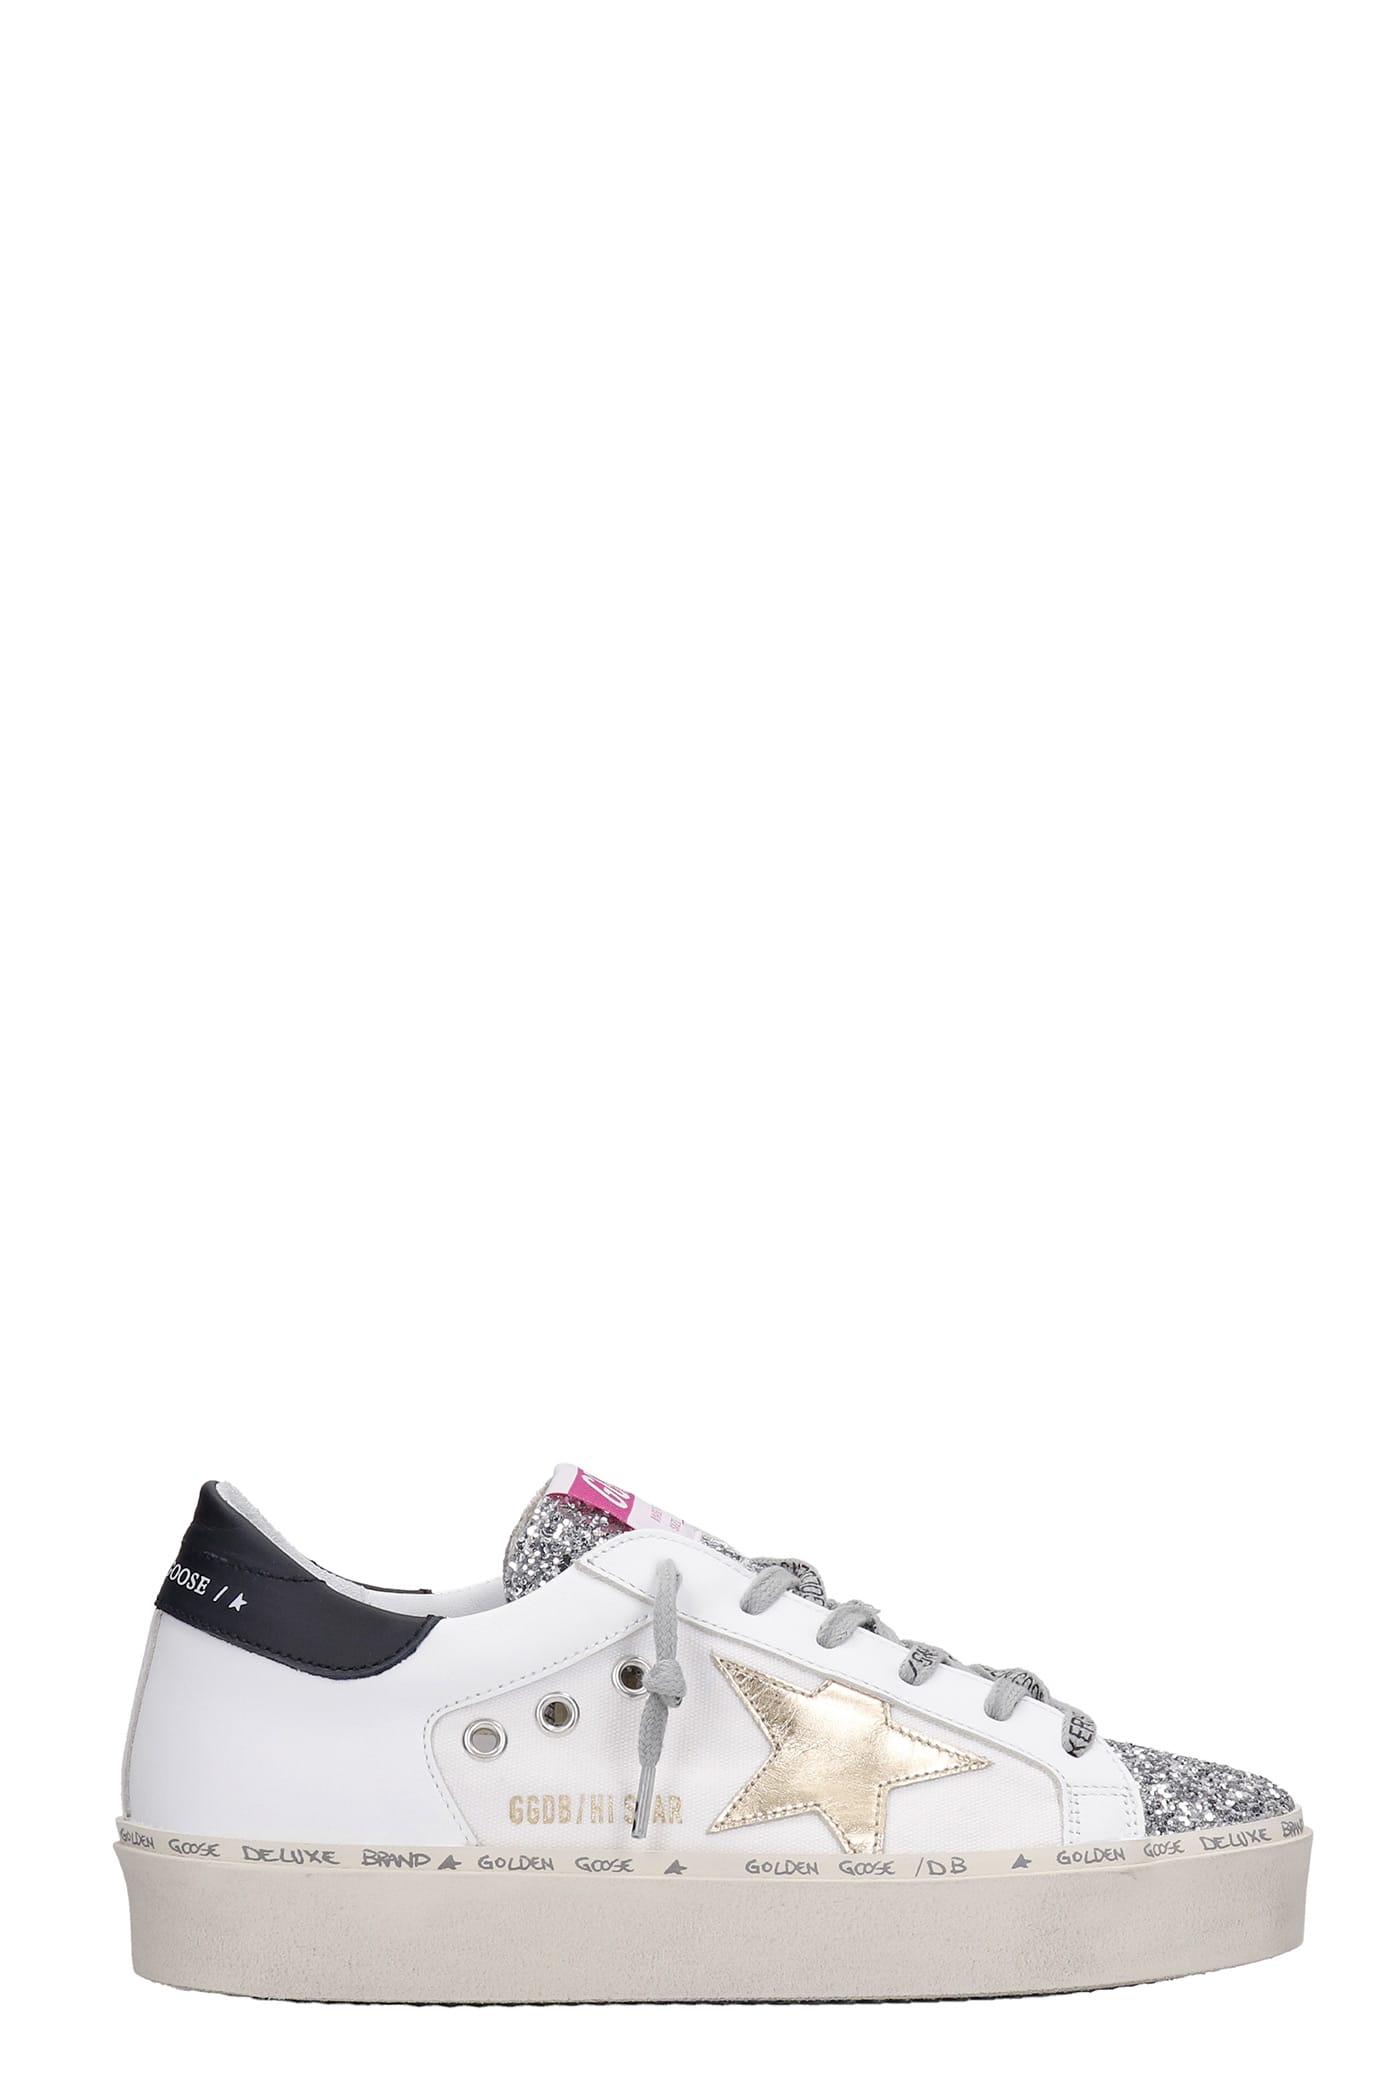 Golden Goose Hi Star Sneakers In White Leather And Fabric